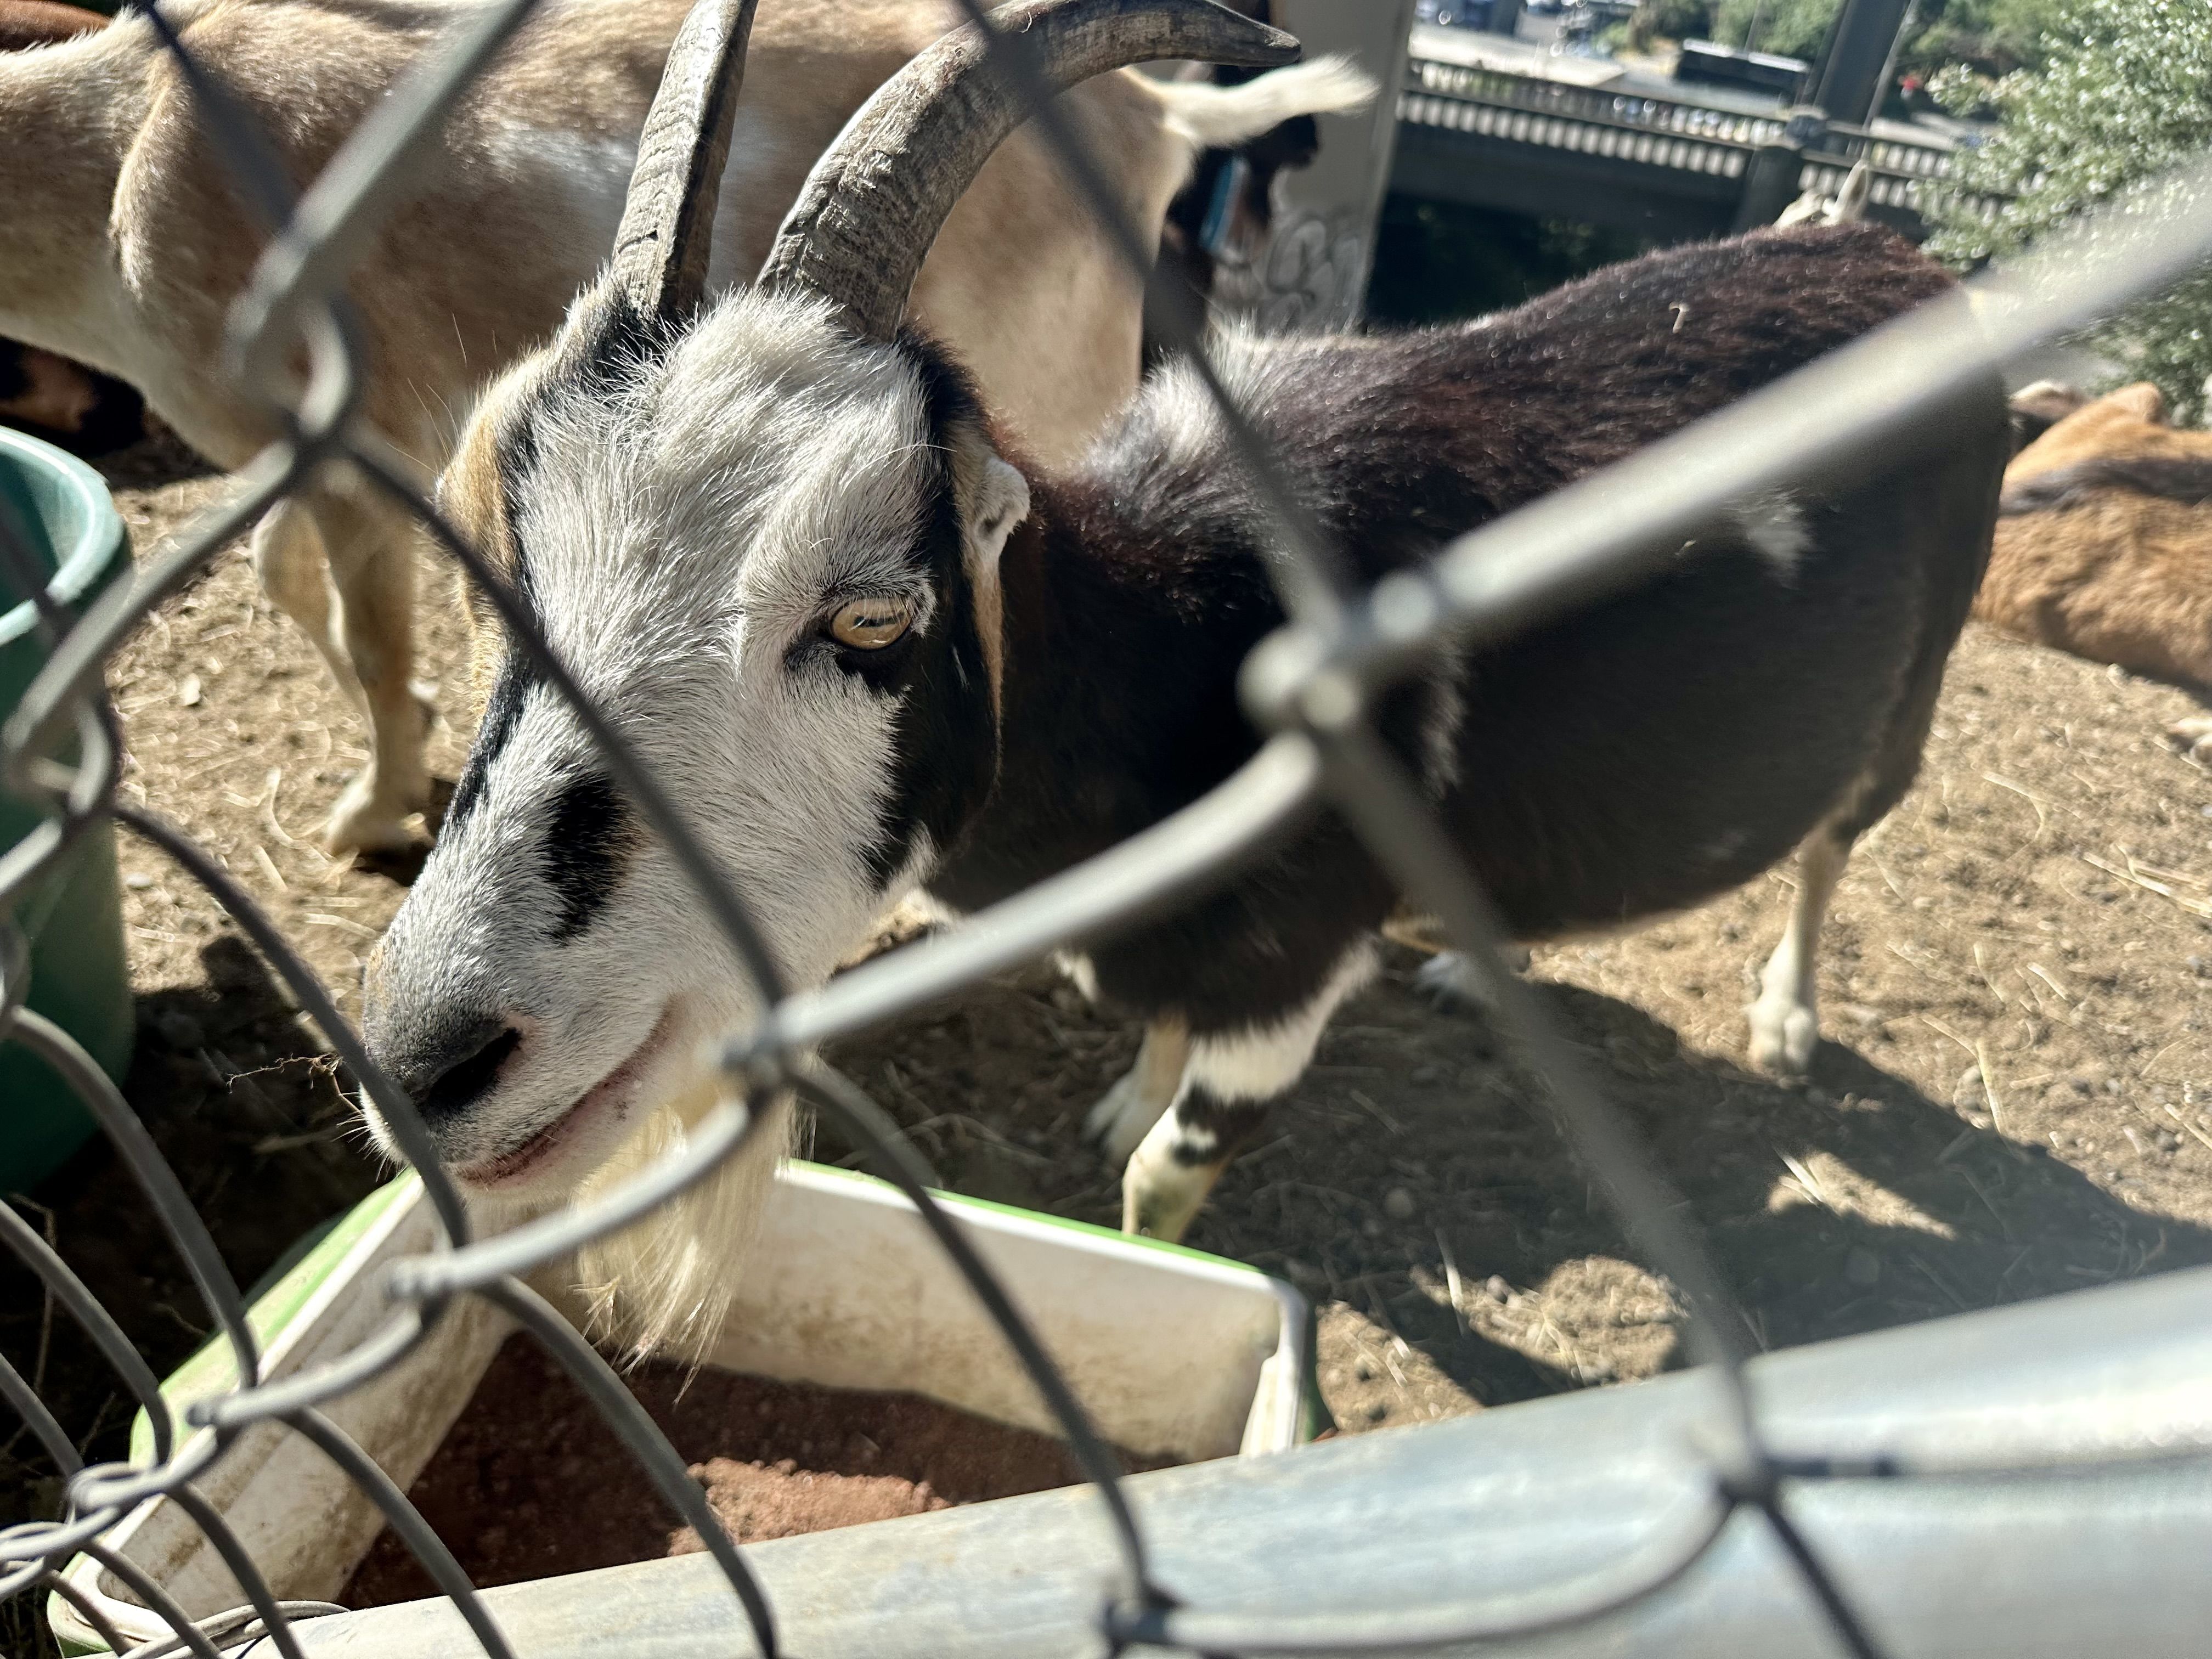 A goat with white, brown and black coloring approaches a chain link fence.